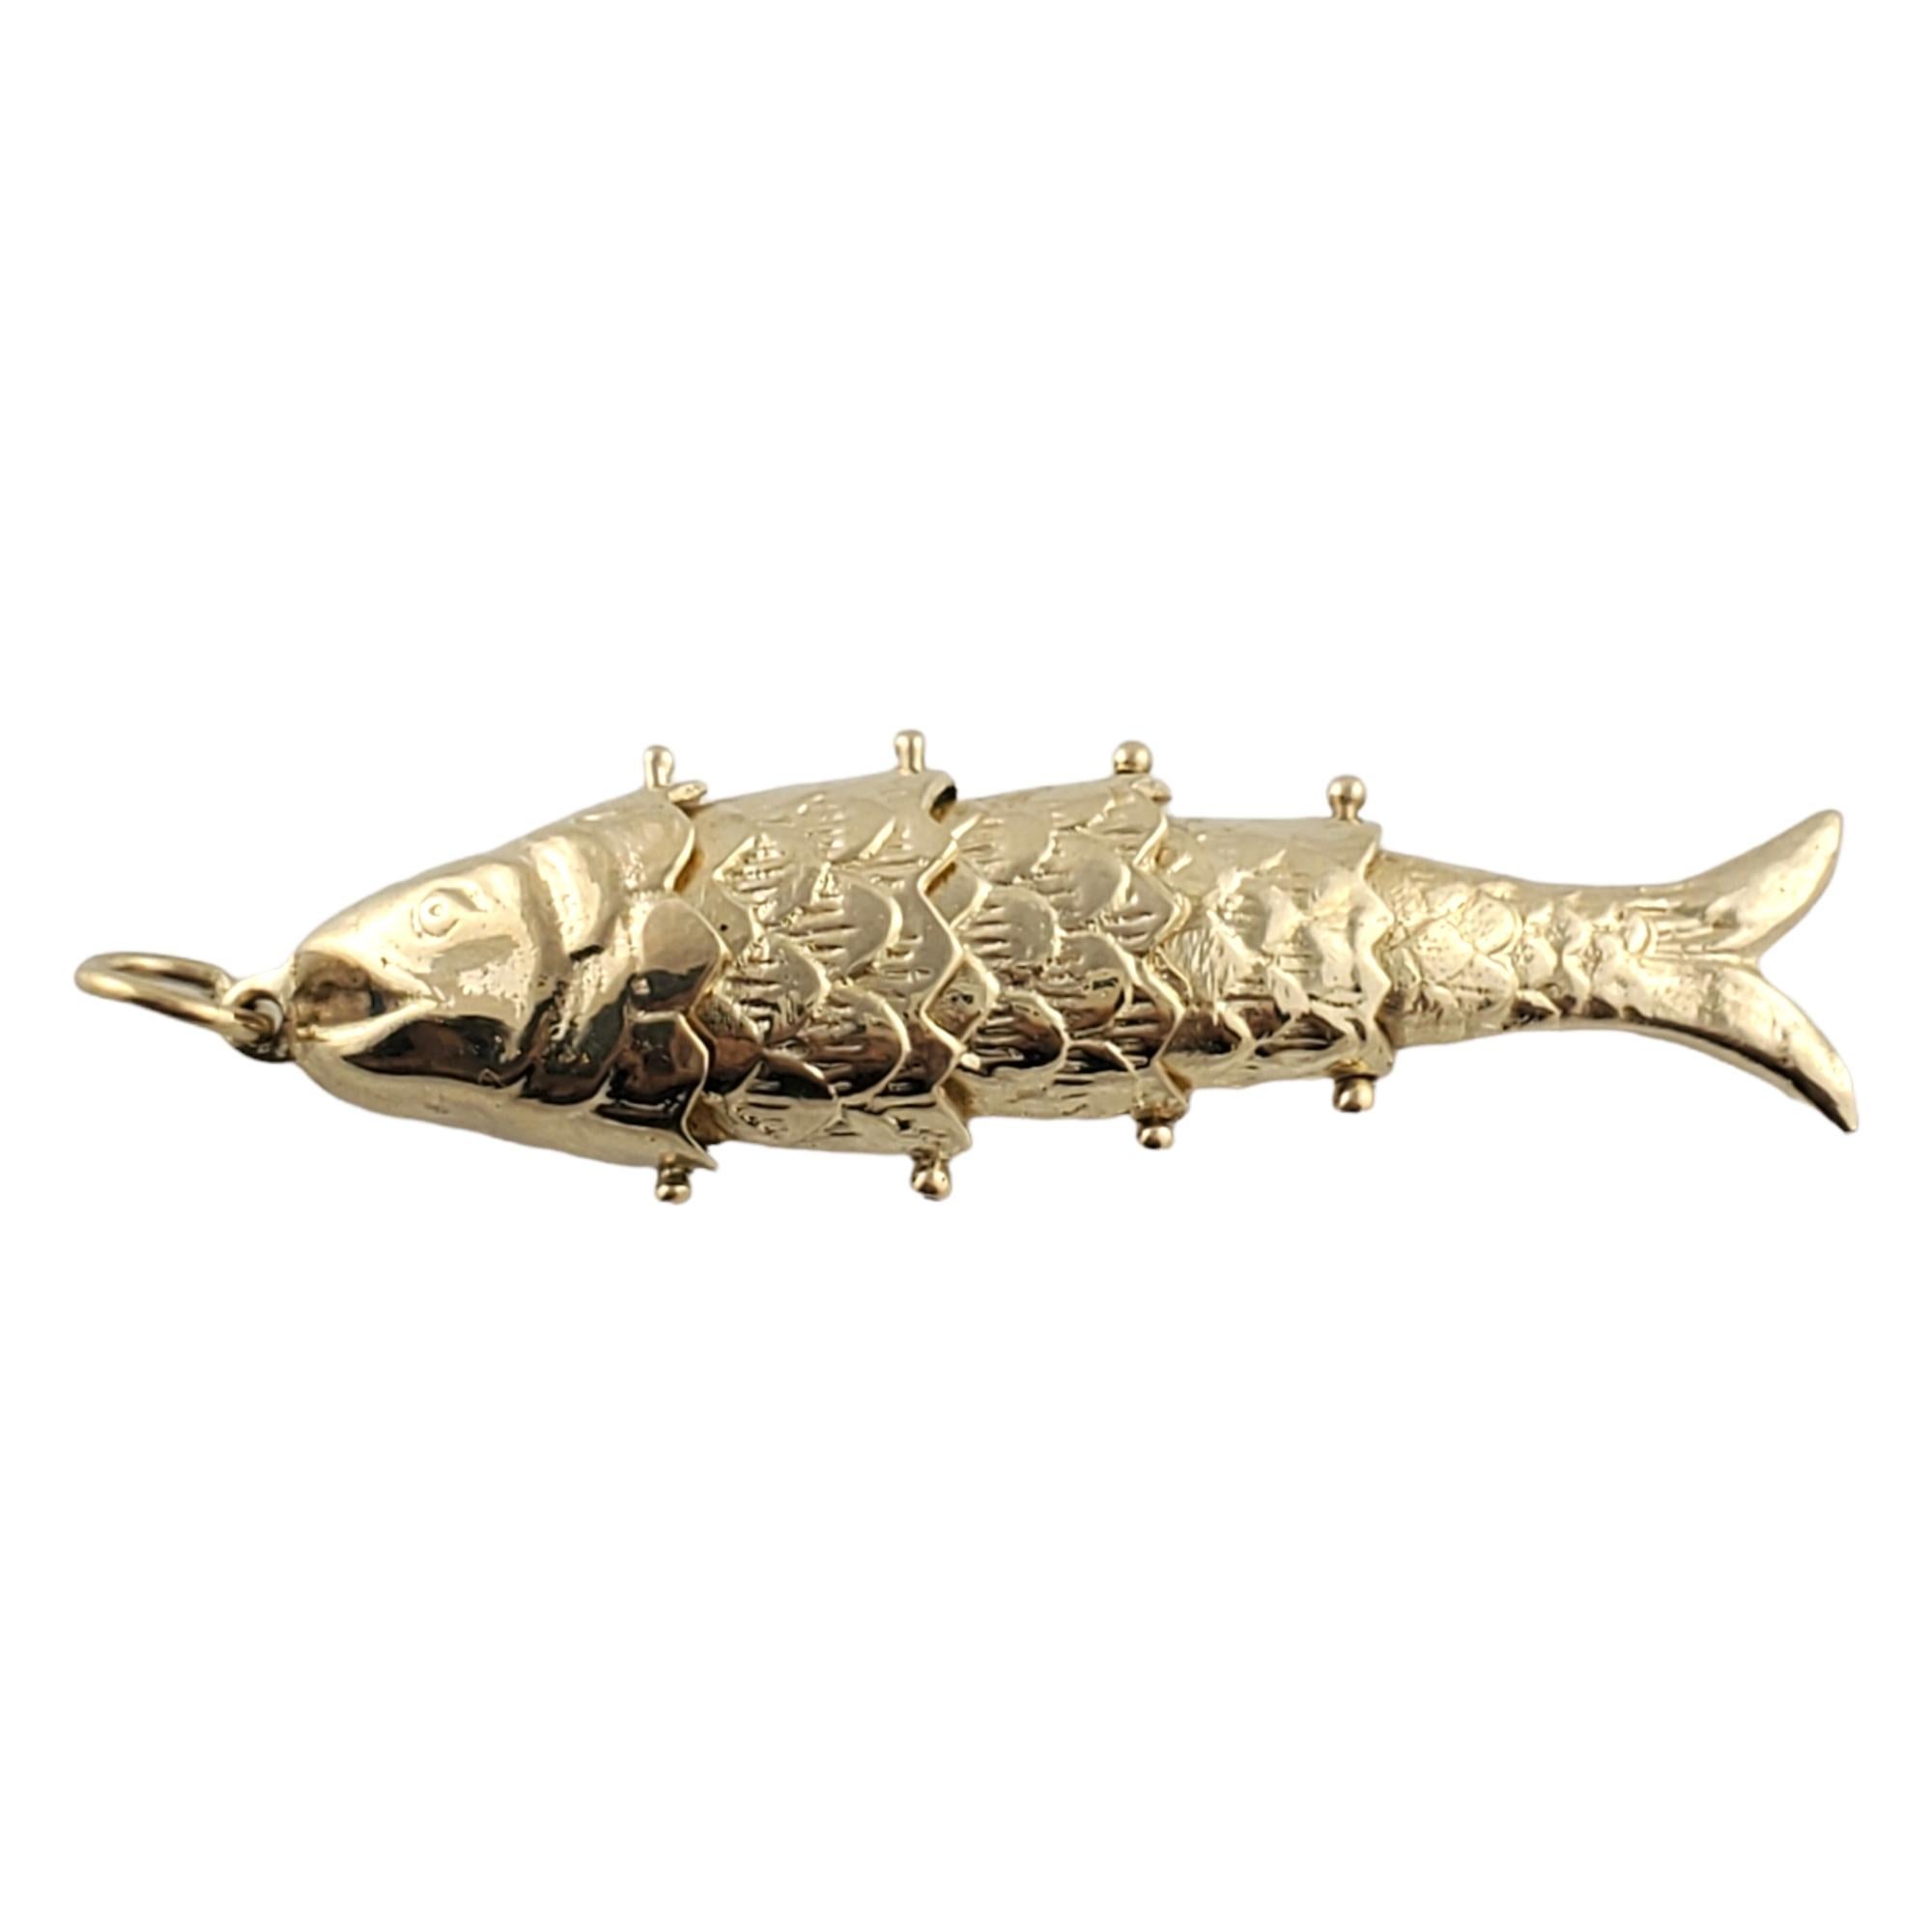 Vintage 14K Yellow Gold Flexible Fish Charm

Adorable 14K yellow gold fish charm moves like a real fish!

Size: 12 mm X 45 mm X 5 mm

Weight: 7.6 g/ 4.8 wt

Tested 14K

Very good condition, professionally polished.

Will come packaged in a gift box